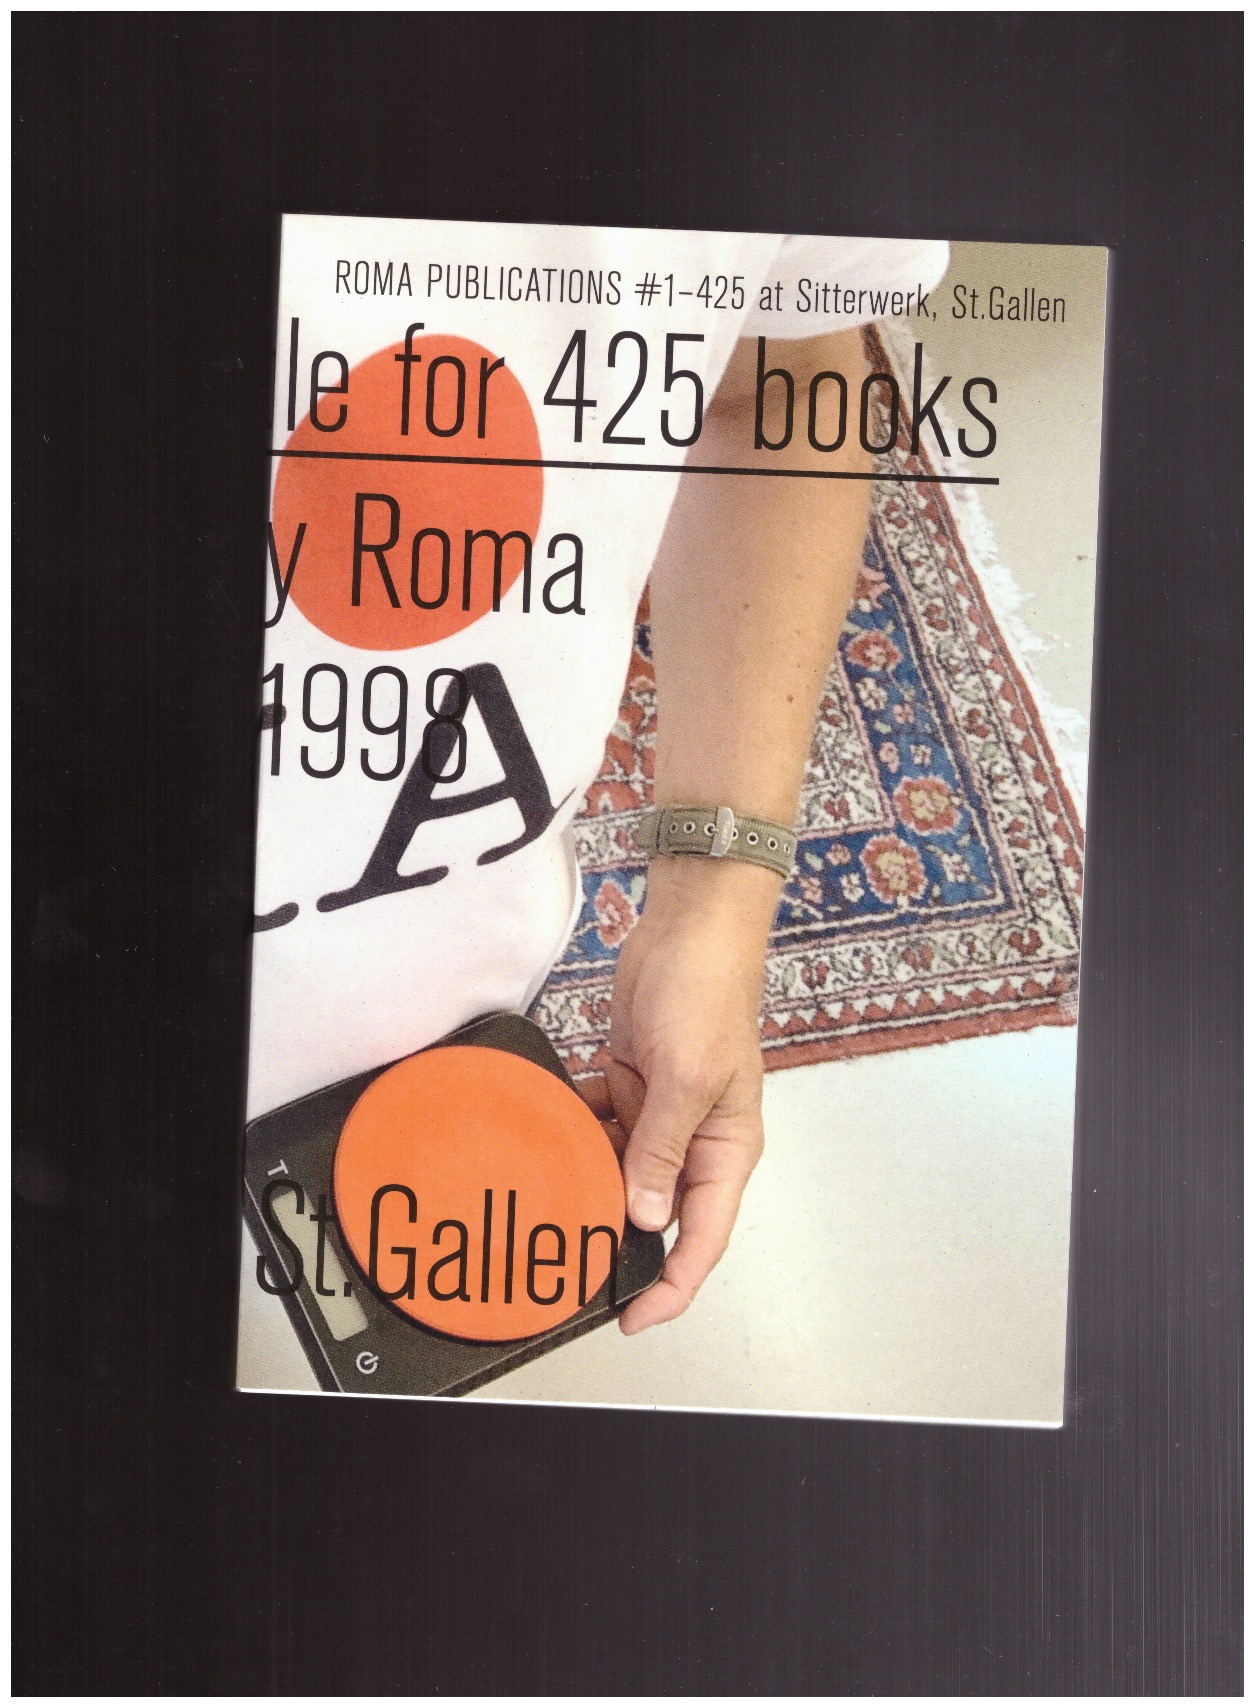 WILLEMS, Roger (ed.) - One can build a table for 425 books. Roma Publications #1-425 at Sitterwerk, St.Gallen